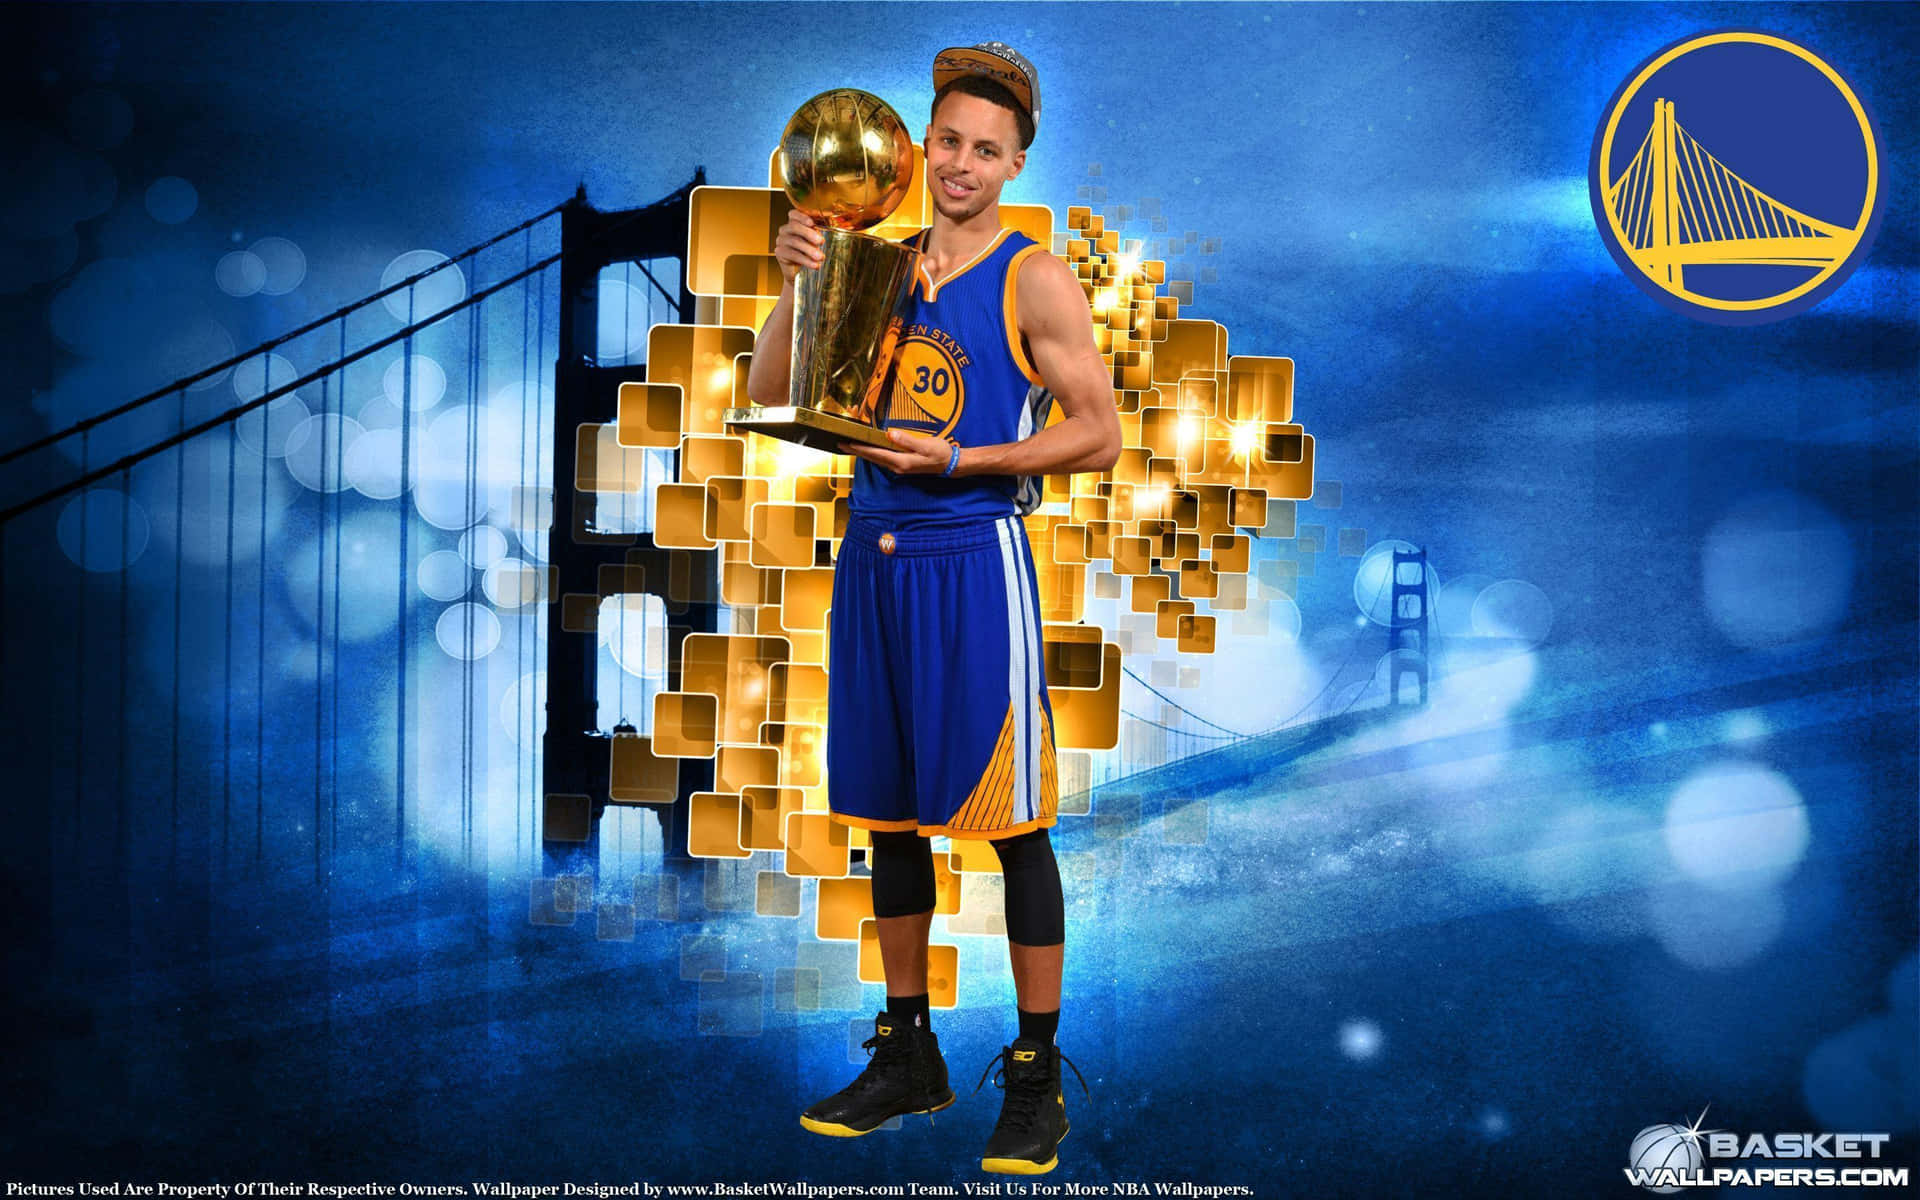 NBA Star Stephen Curry on the Court Wallpaper